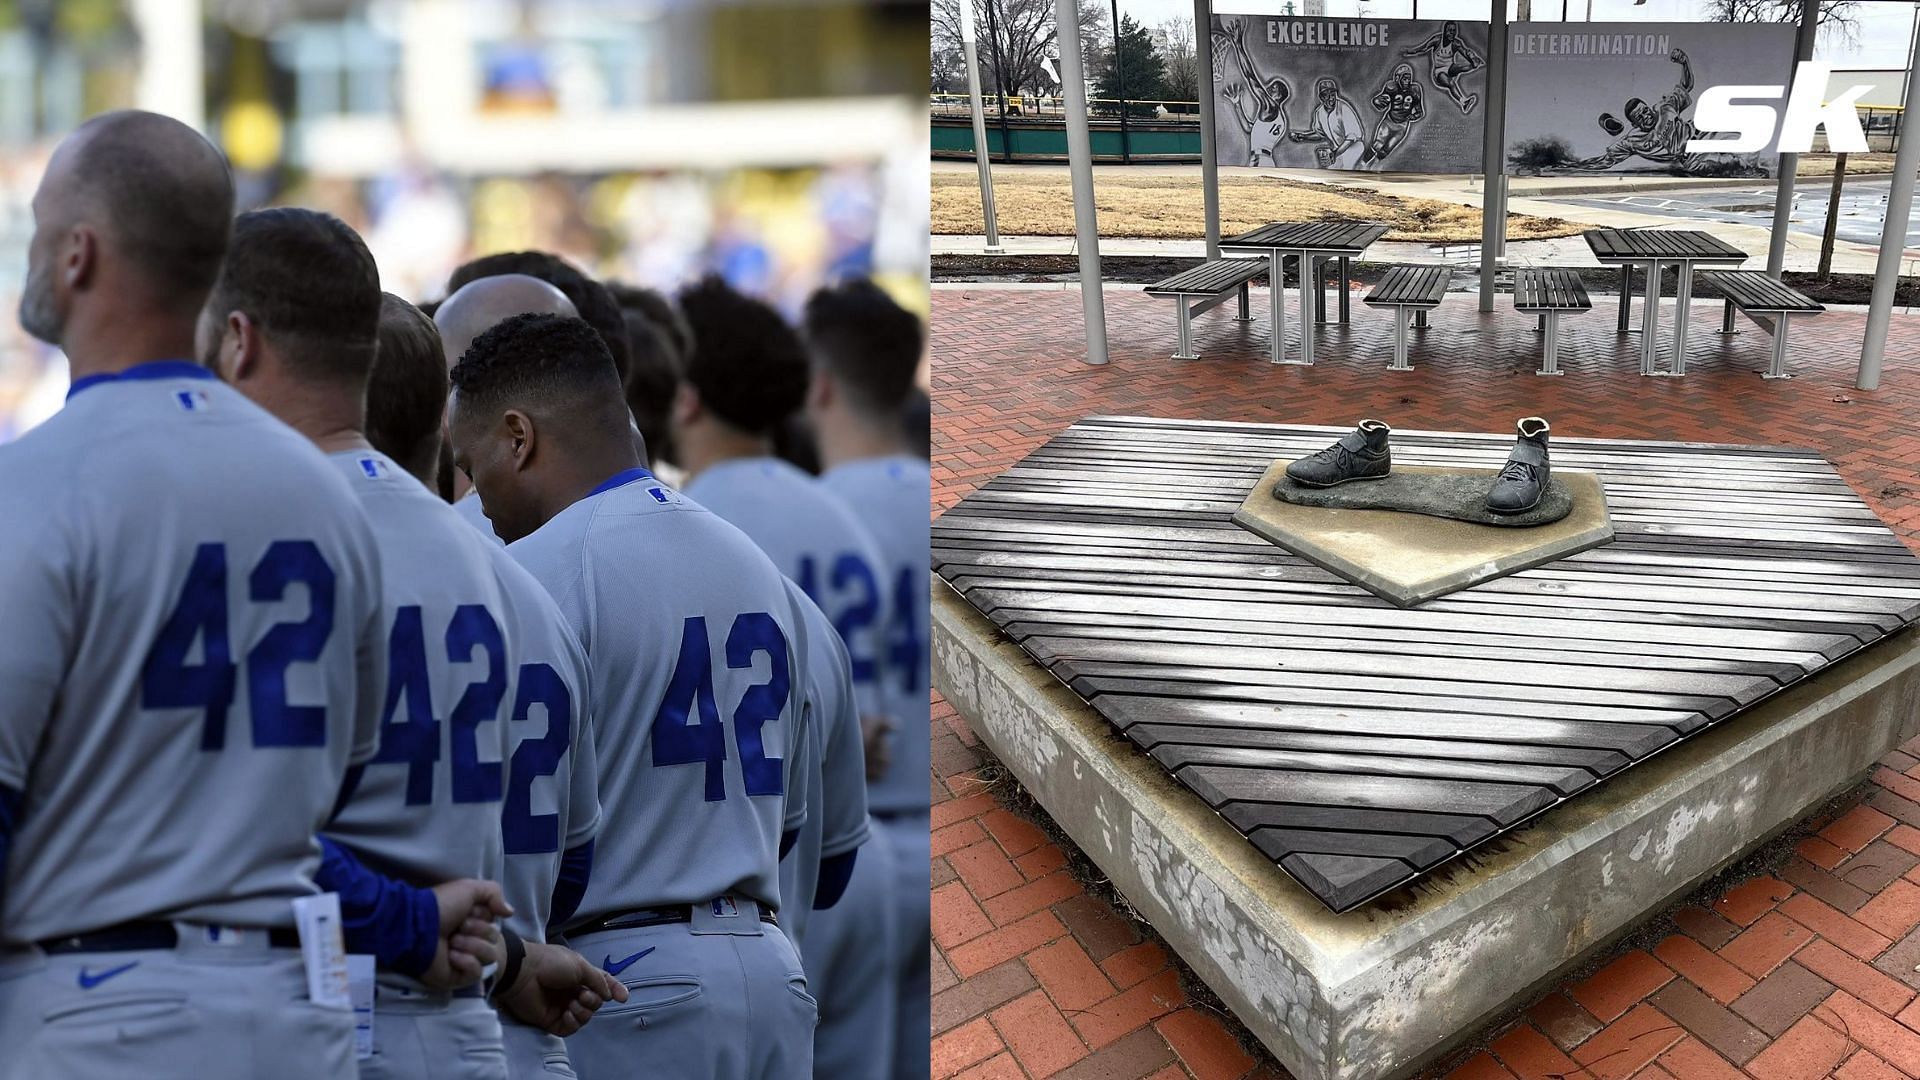 45 year old Ricky Alderete has been arrested in connection with a stolen Jackie Robinson statue in Wichita, Kansas